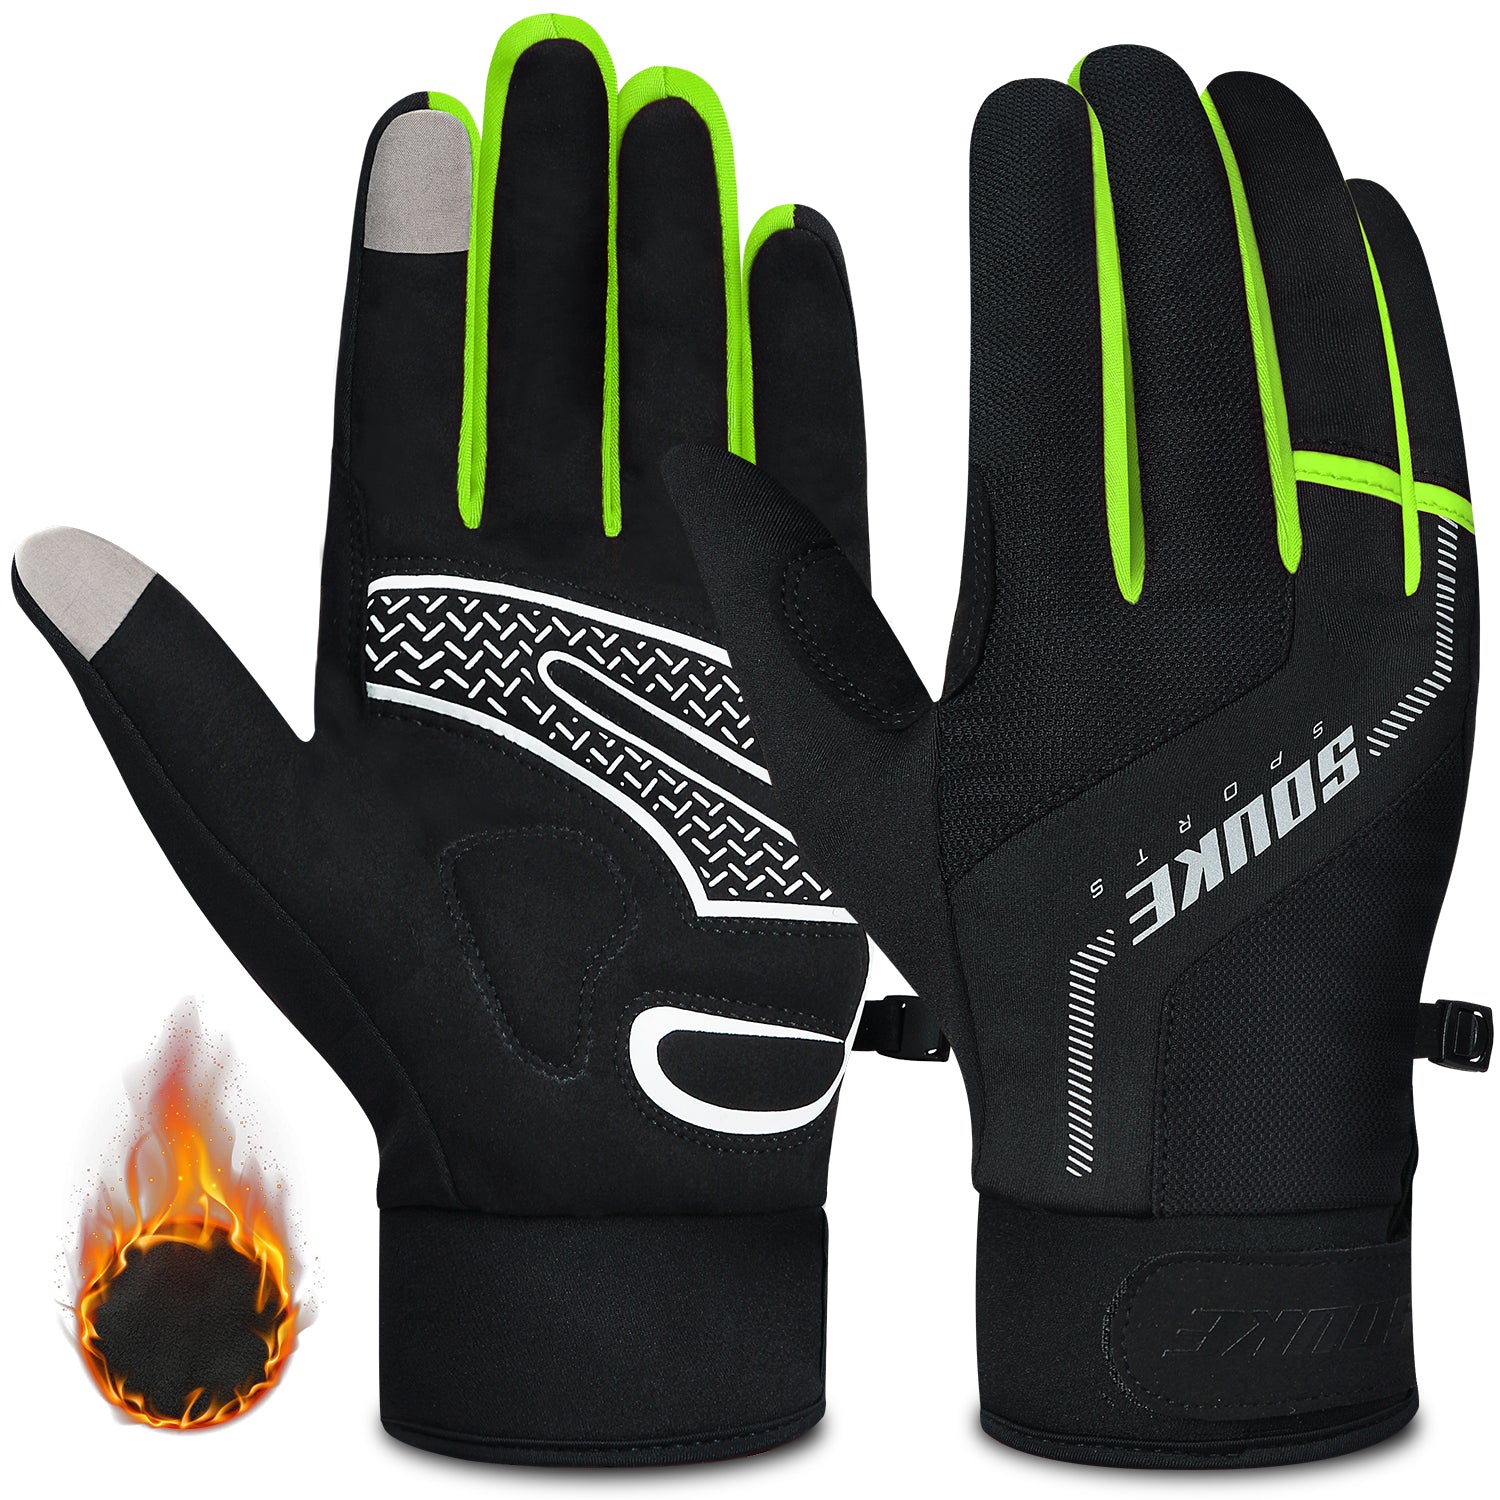 souke sports, souke ST1903, cycling accessories, riding accessories, cycling gloves, FULL finger cycling gloves, bicycle gloves for men and women, road bike cycling gloves, orange, green, black and red white cycling gloves, cycling gloves padded, padded cycling gloves for men and women (6633665429617)